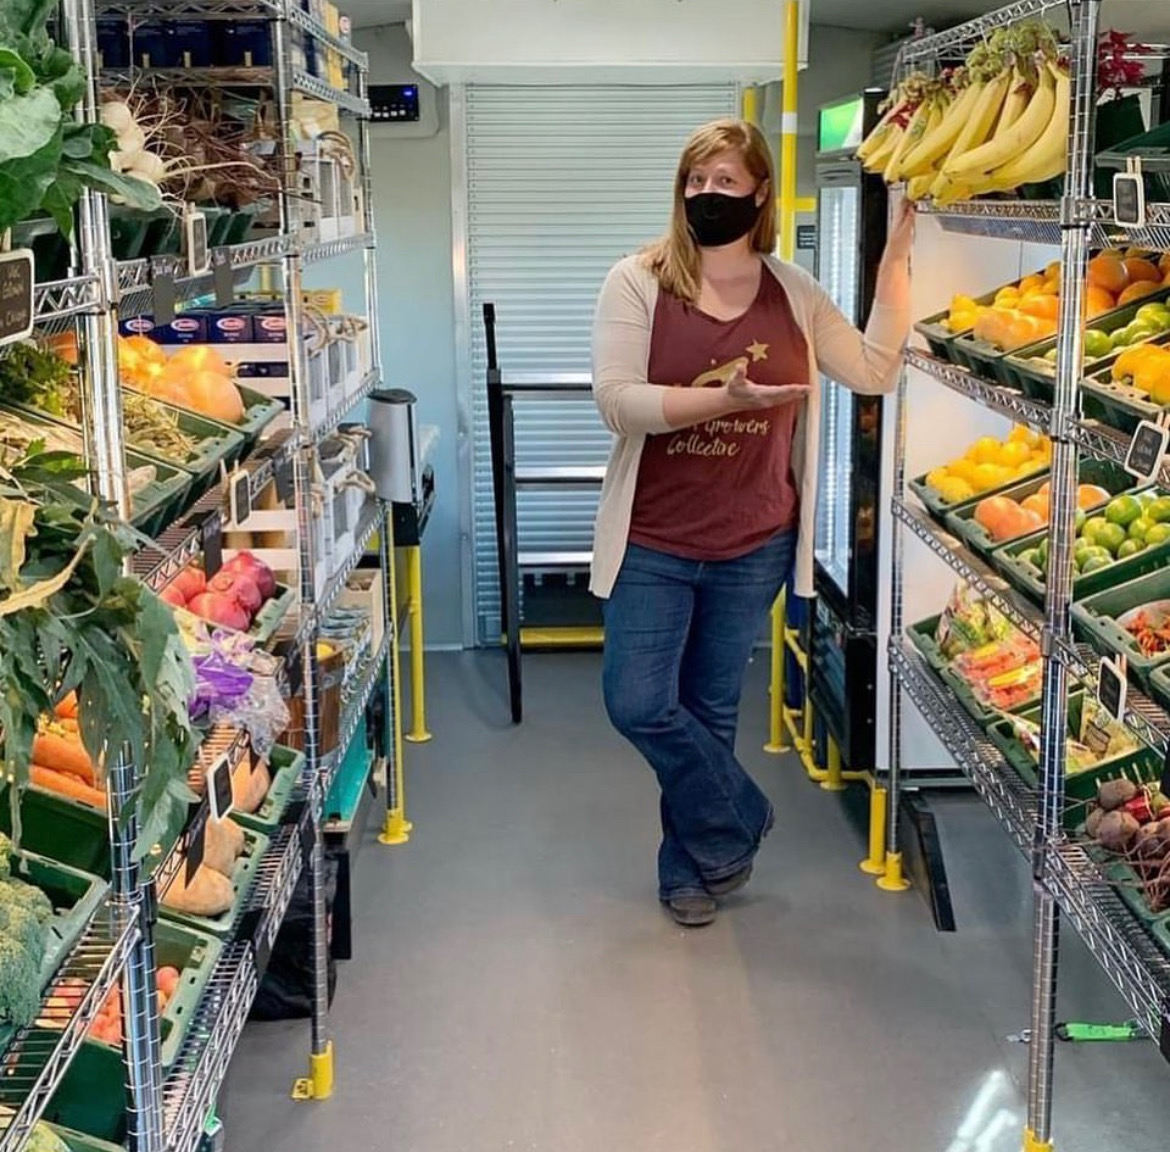 A woman stands between two rows of stocked fruits and vegetables and gestures toward some bananas.